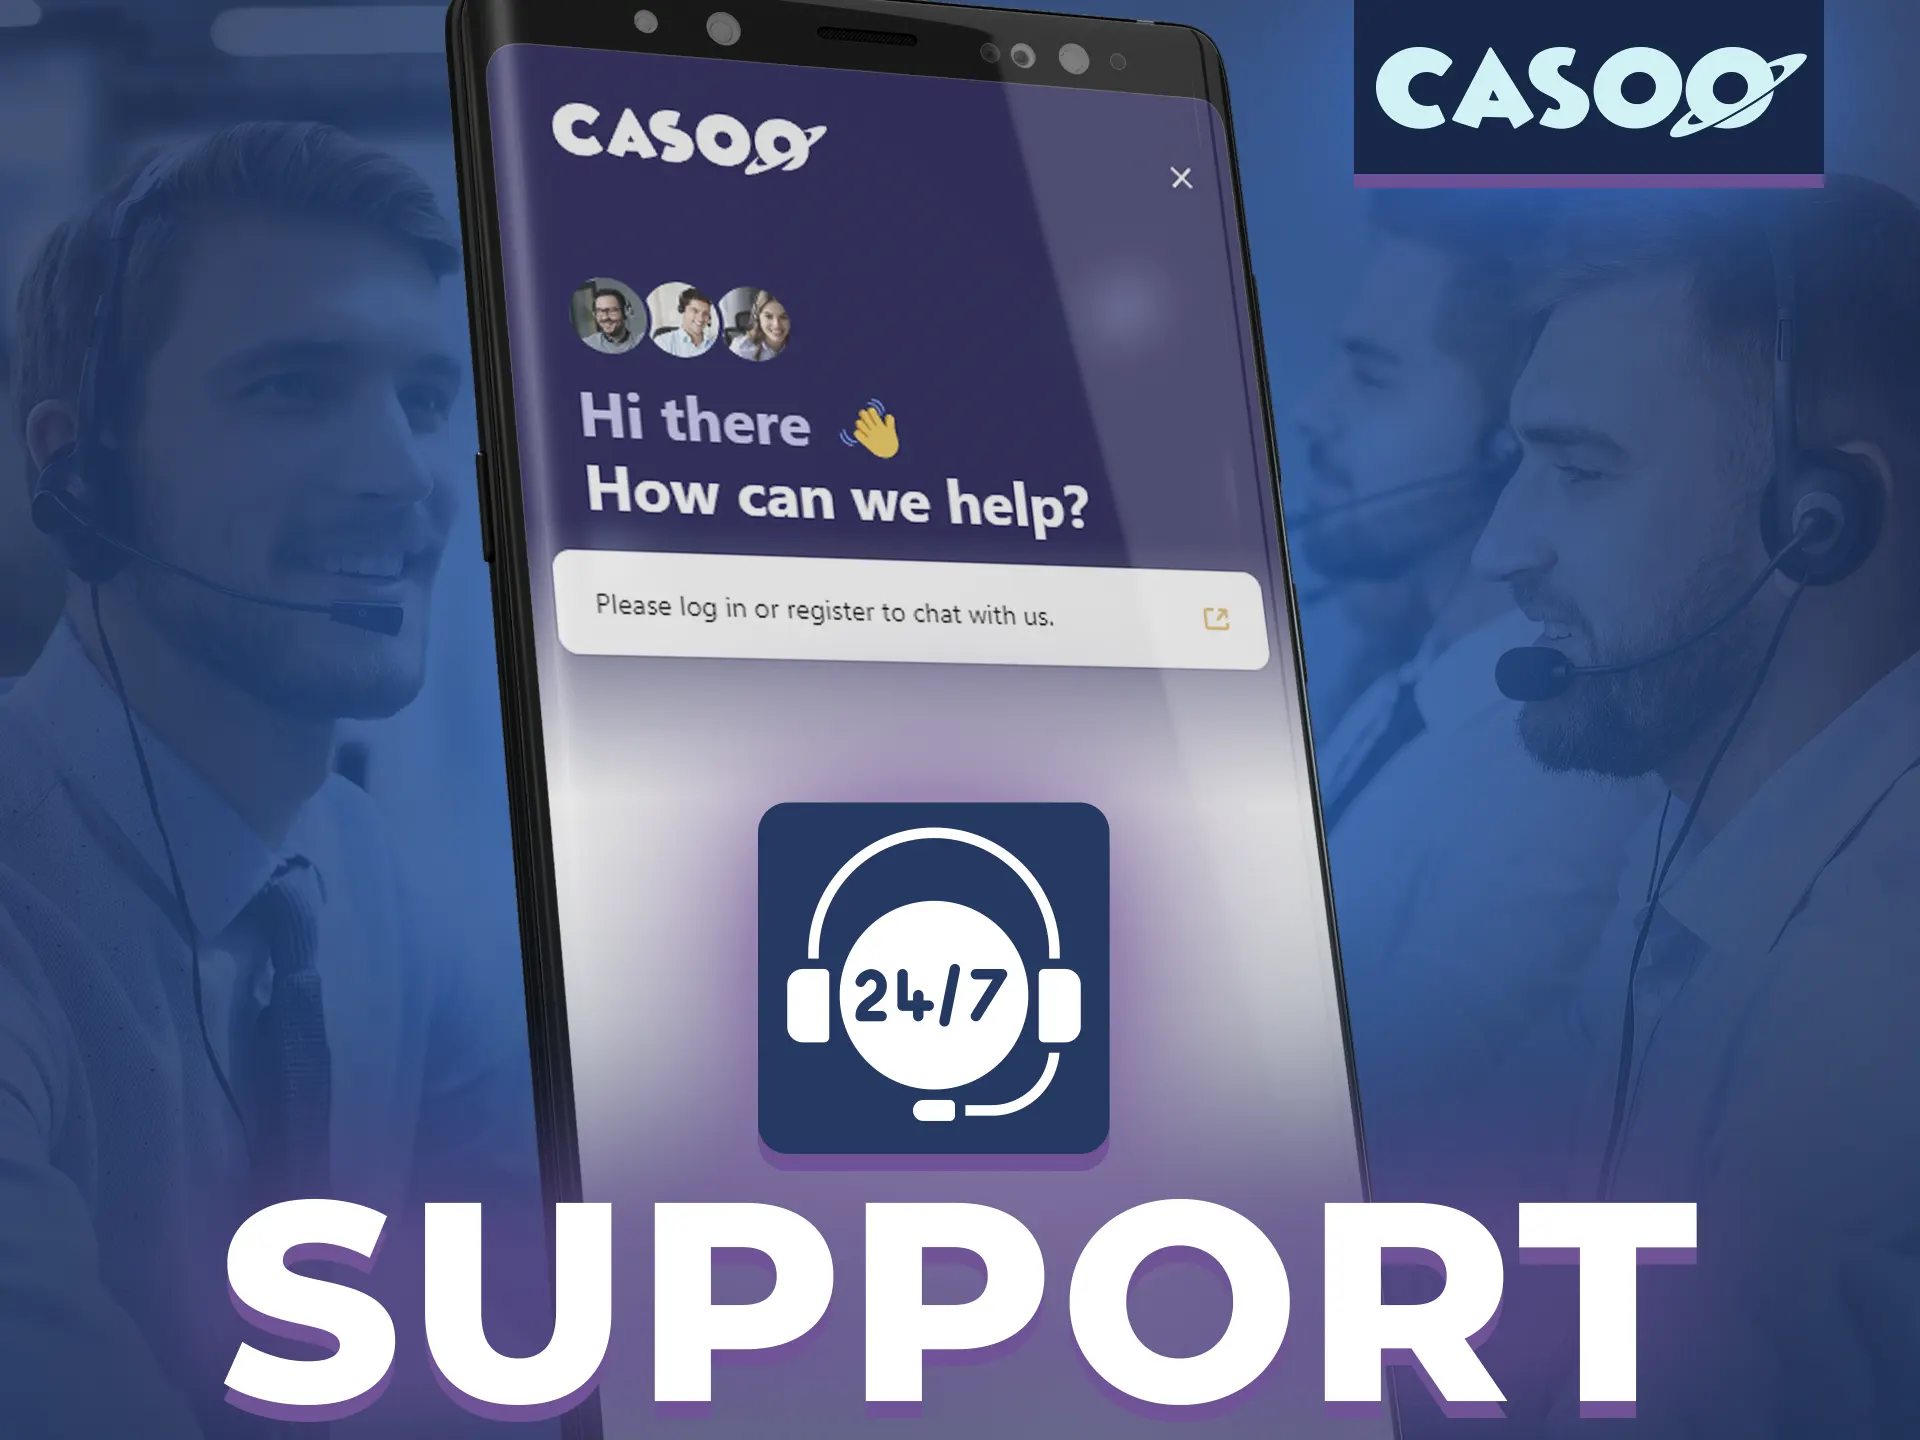 If you have some problems or questions, contact Casoo support.